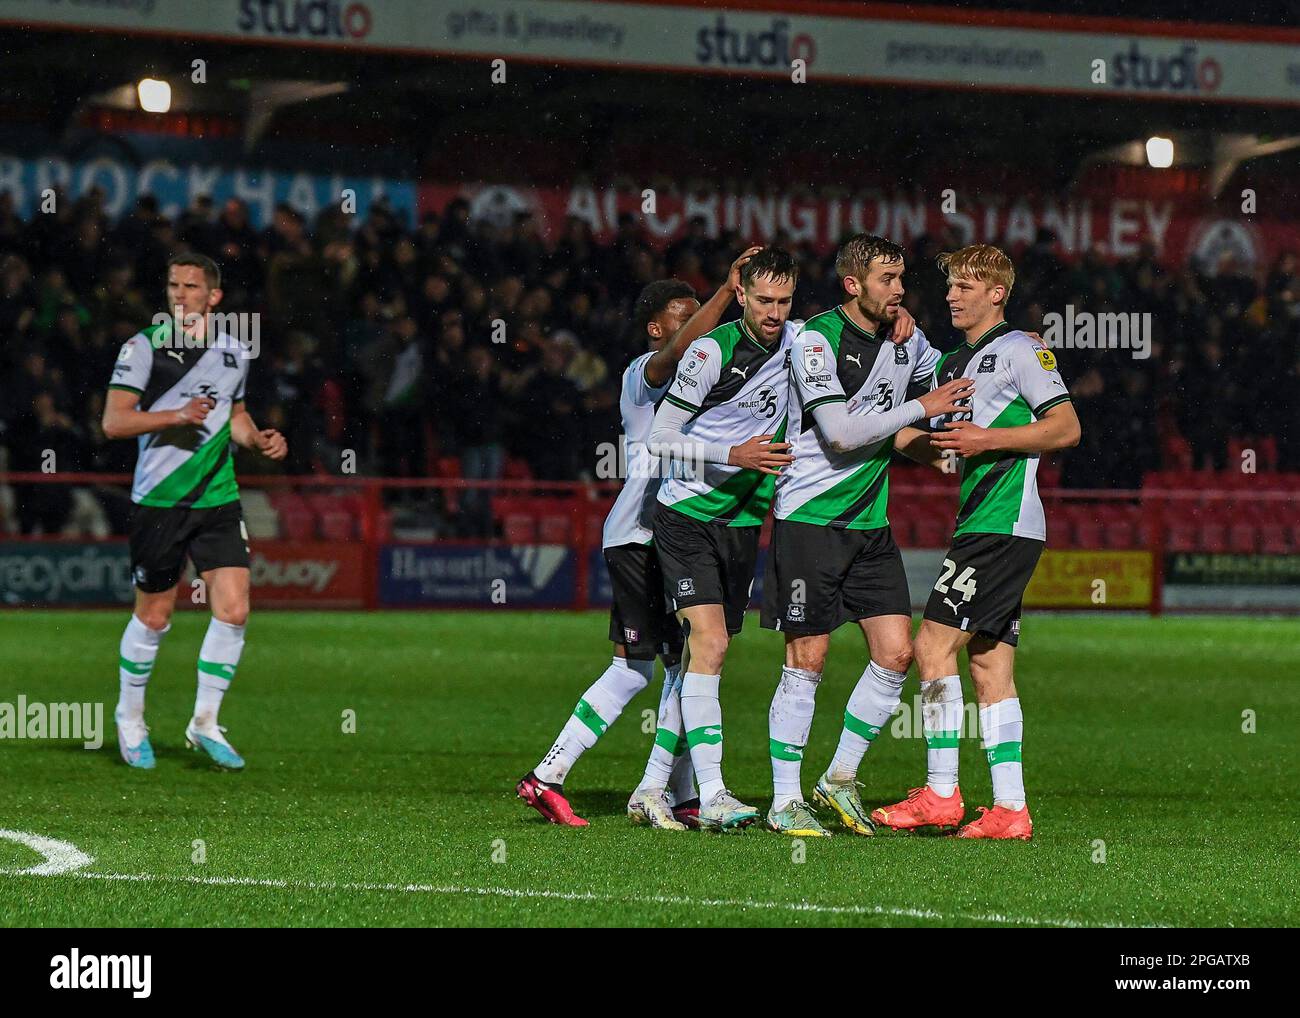 Matt Butcher#7 of Plymouth Argyle scores to make it 0-1 during the Sky Bet League 1 match Accrington Stanley vs Plymouth Argyle at Wham Stadium, Accrington, United Kingdom, 21st March 2023  (Photo by Stan Kasala/News Images) Stock Photo